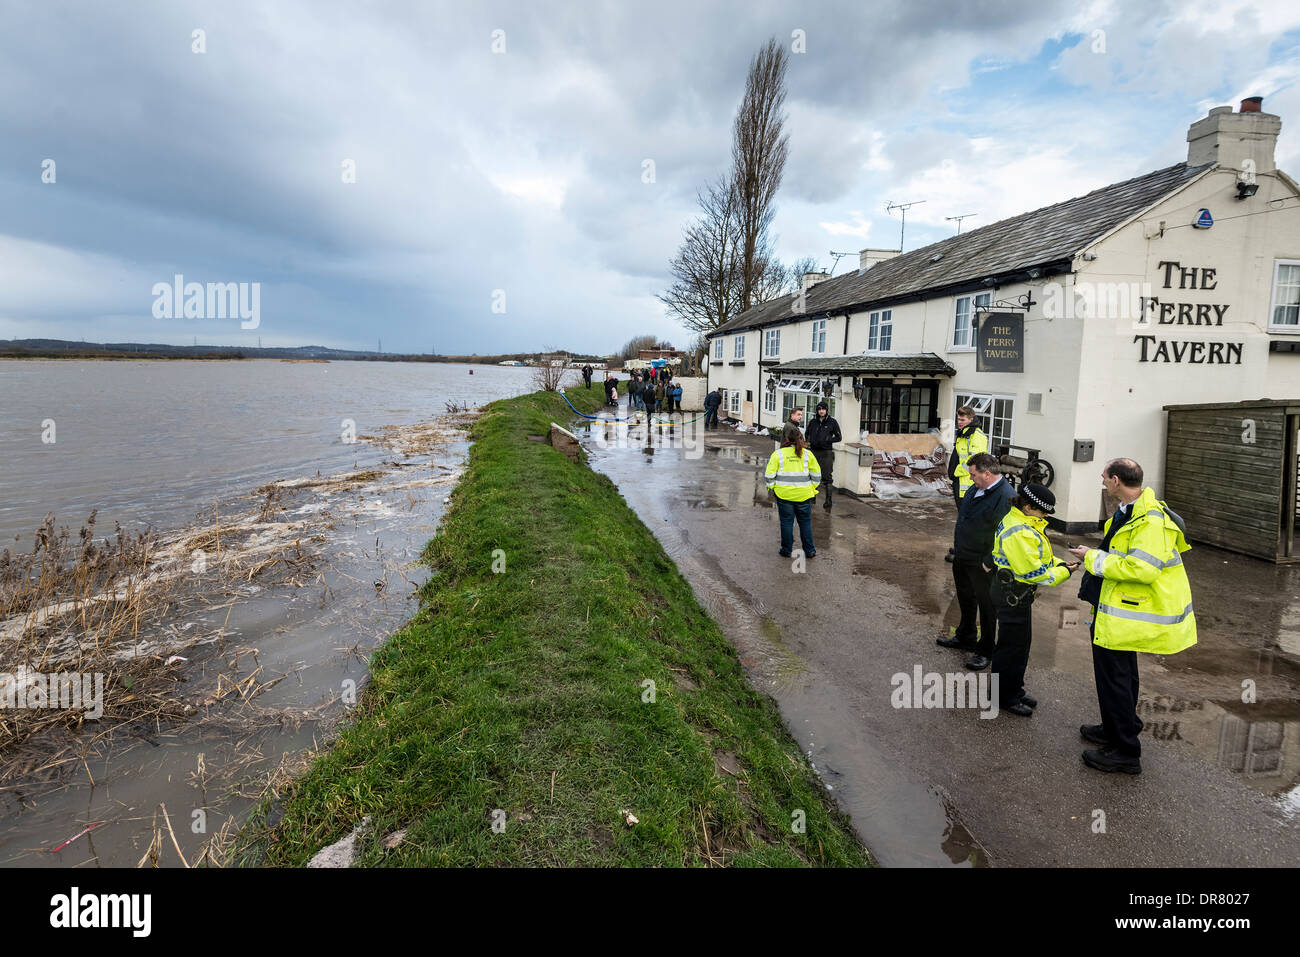 The Fiddlers Ferry Tavern by the River Mersey at Penketh recently flooded on Dec 5th 2013 under threat again. Stock Photo